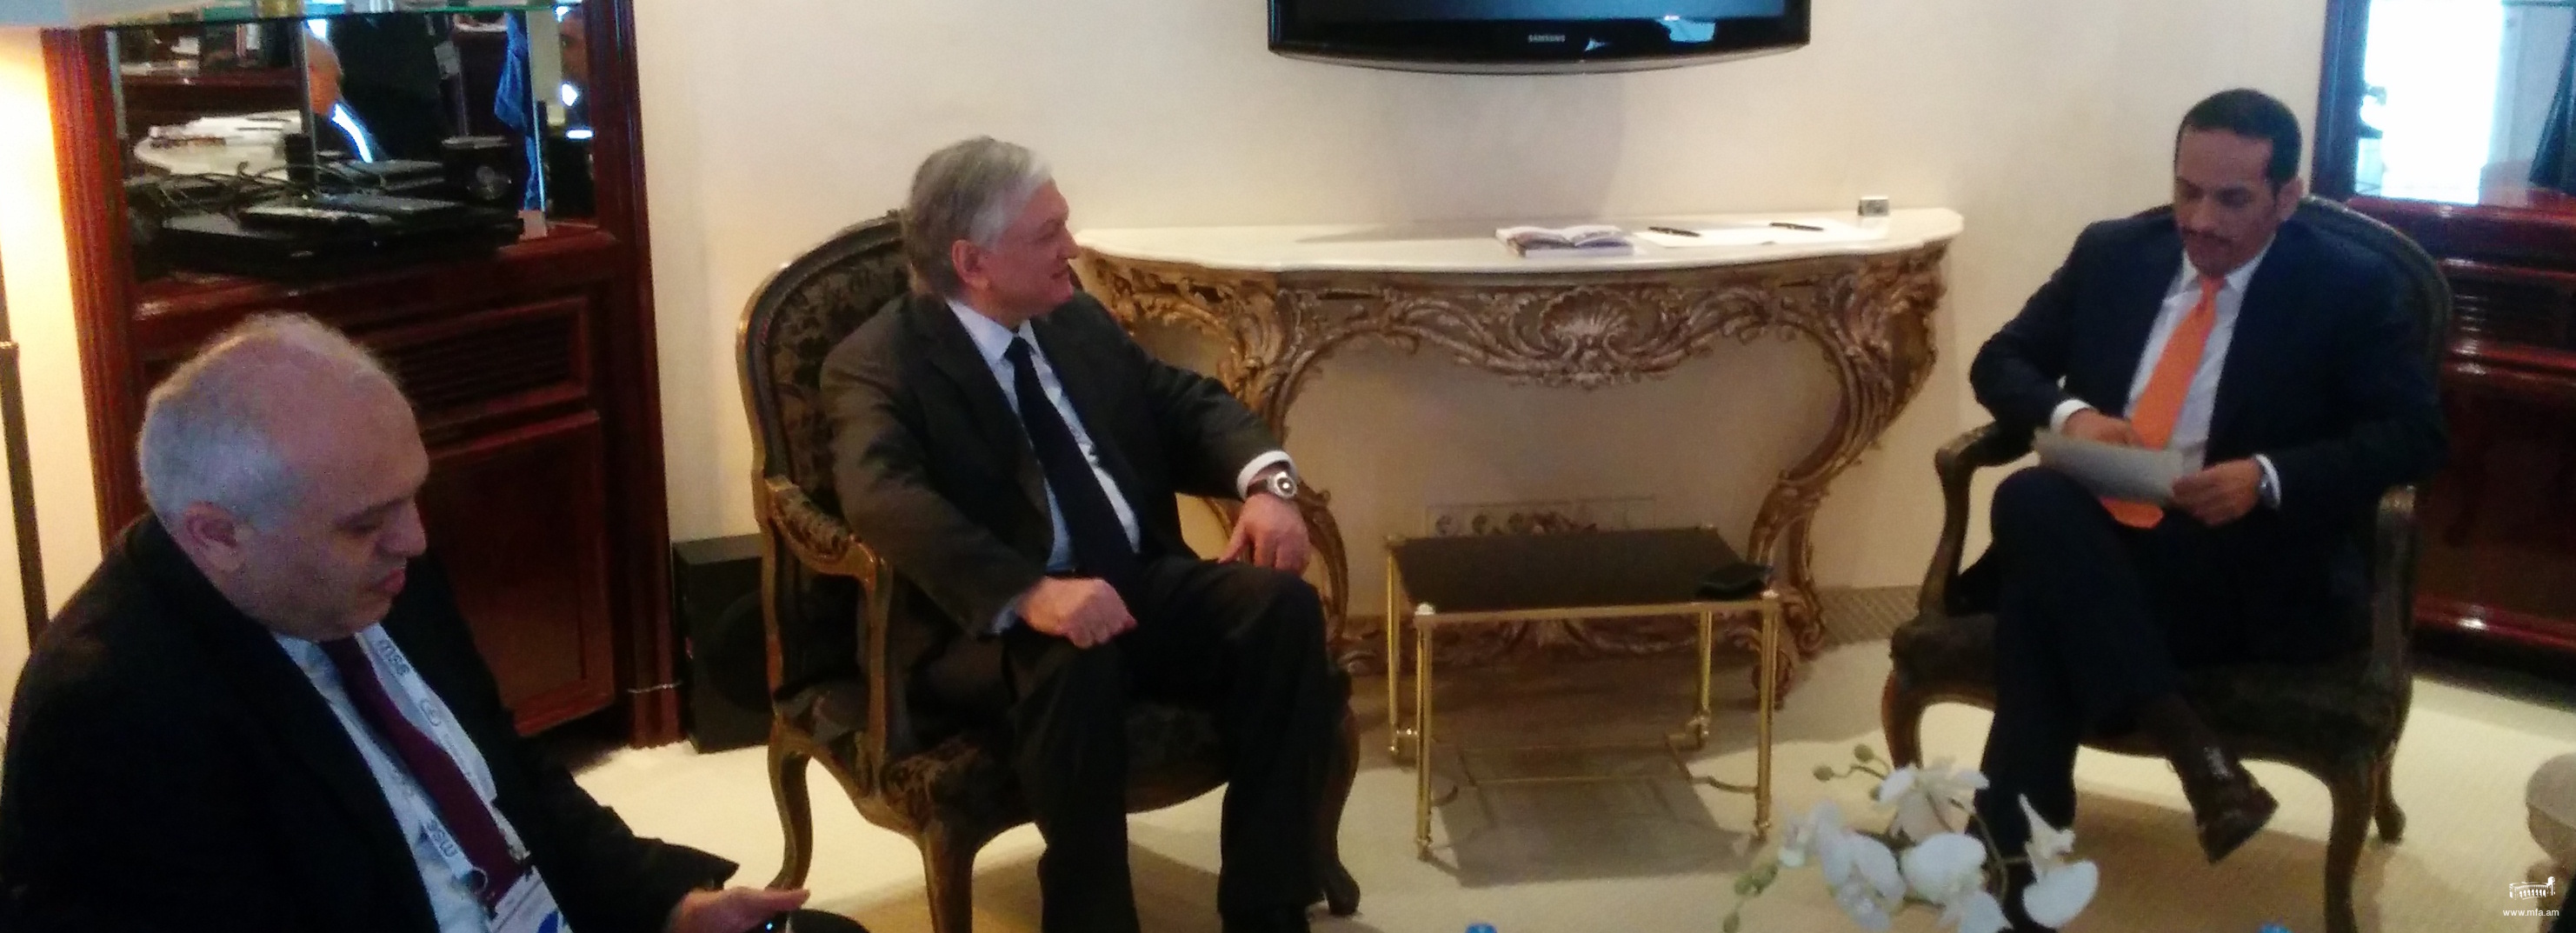 Foreign Minister of Armenia met with Foreign Minister of Qatar